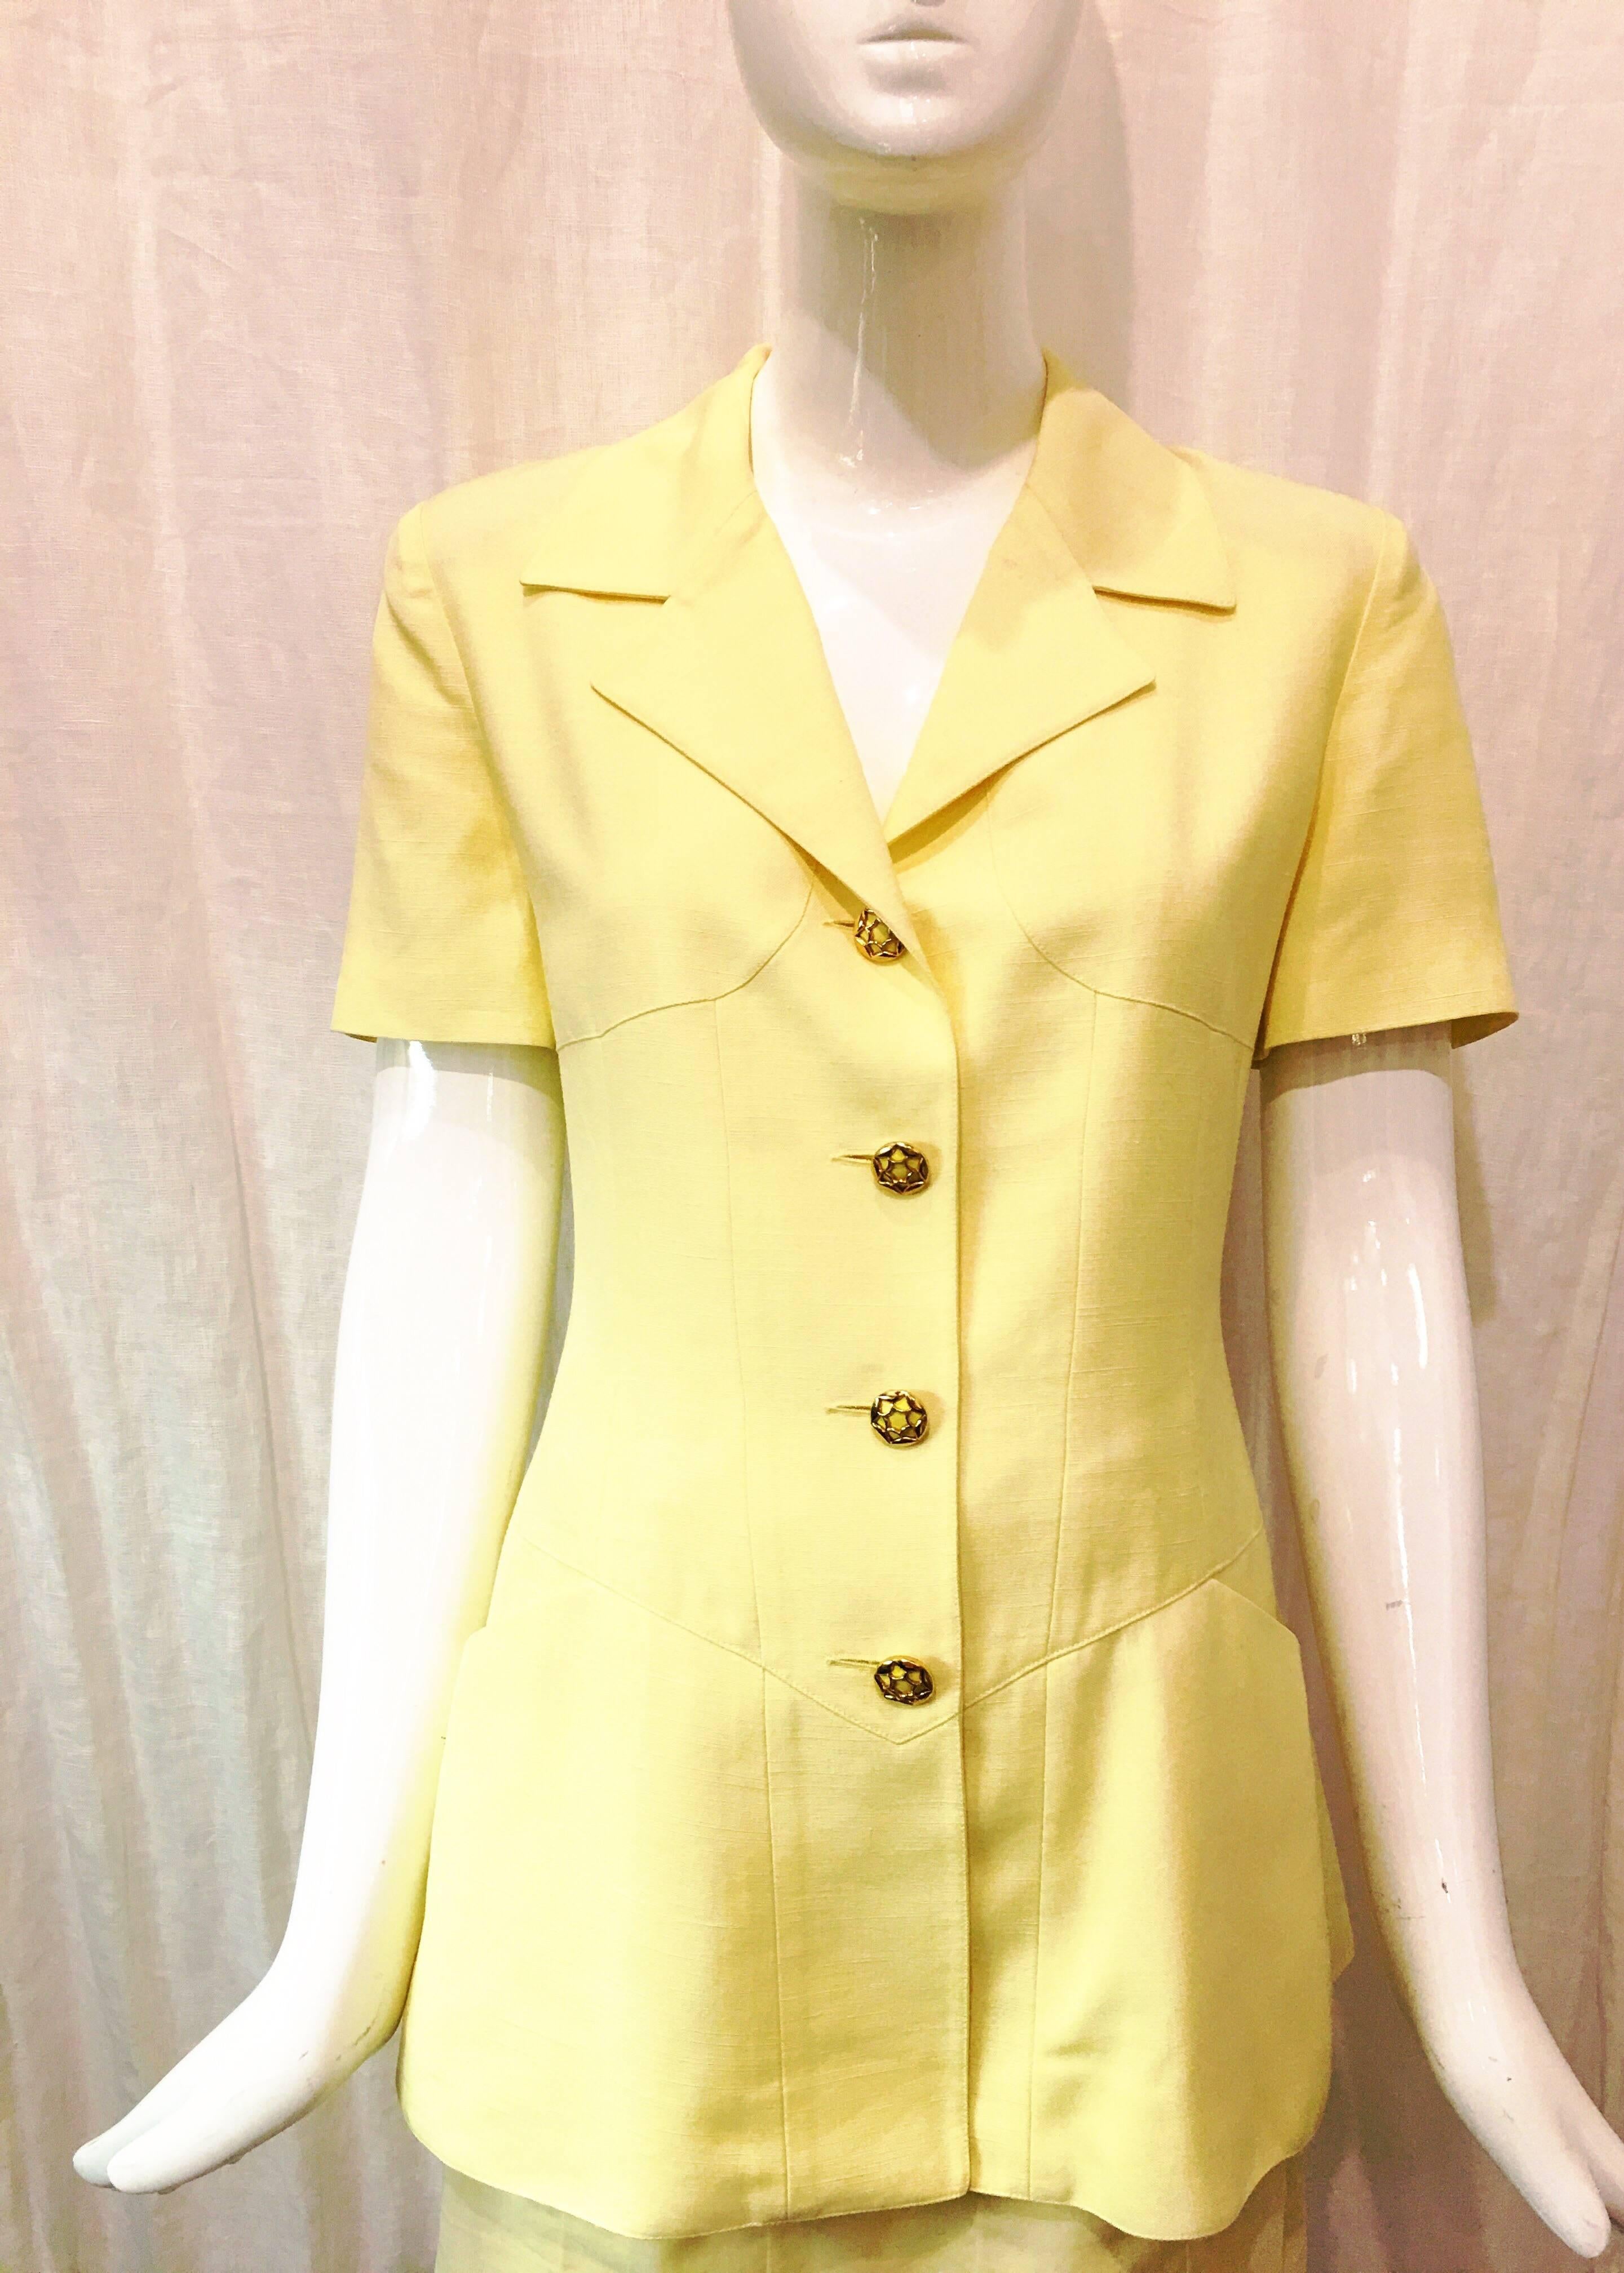 Karl Lagerfeld Pale Yellow Linen Short Sleeve Skirt Suit  In Excellent Condition For Sale In Brooklyn, NY